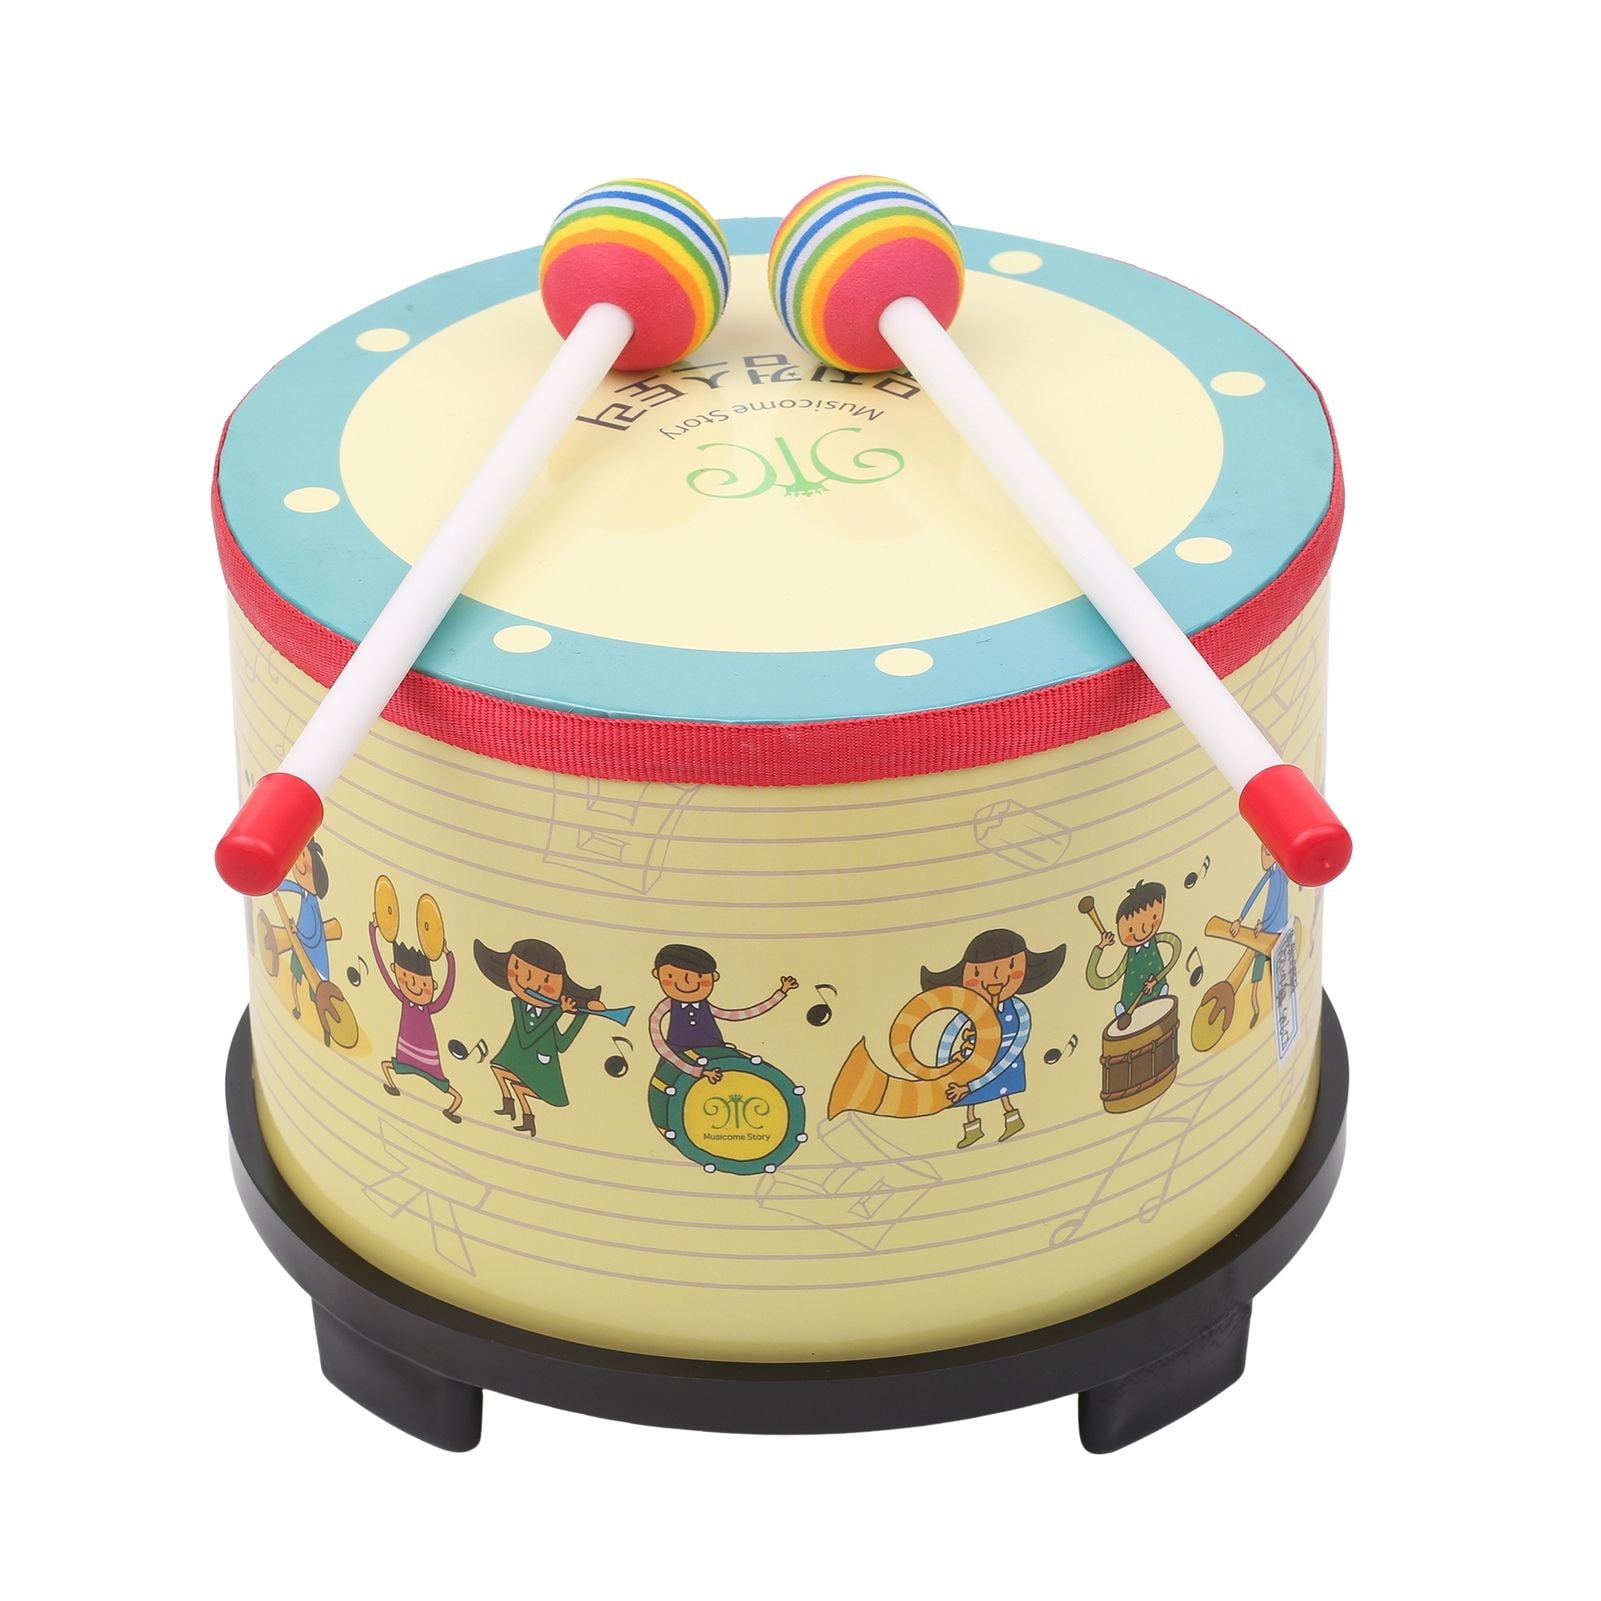 Toddler Educational Musical Percussion for Kid Children Instruments AL 